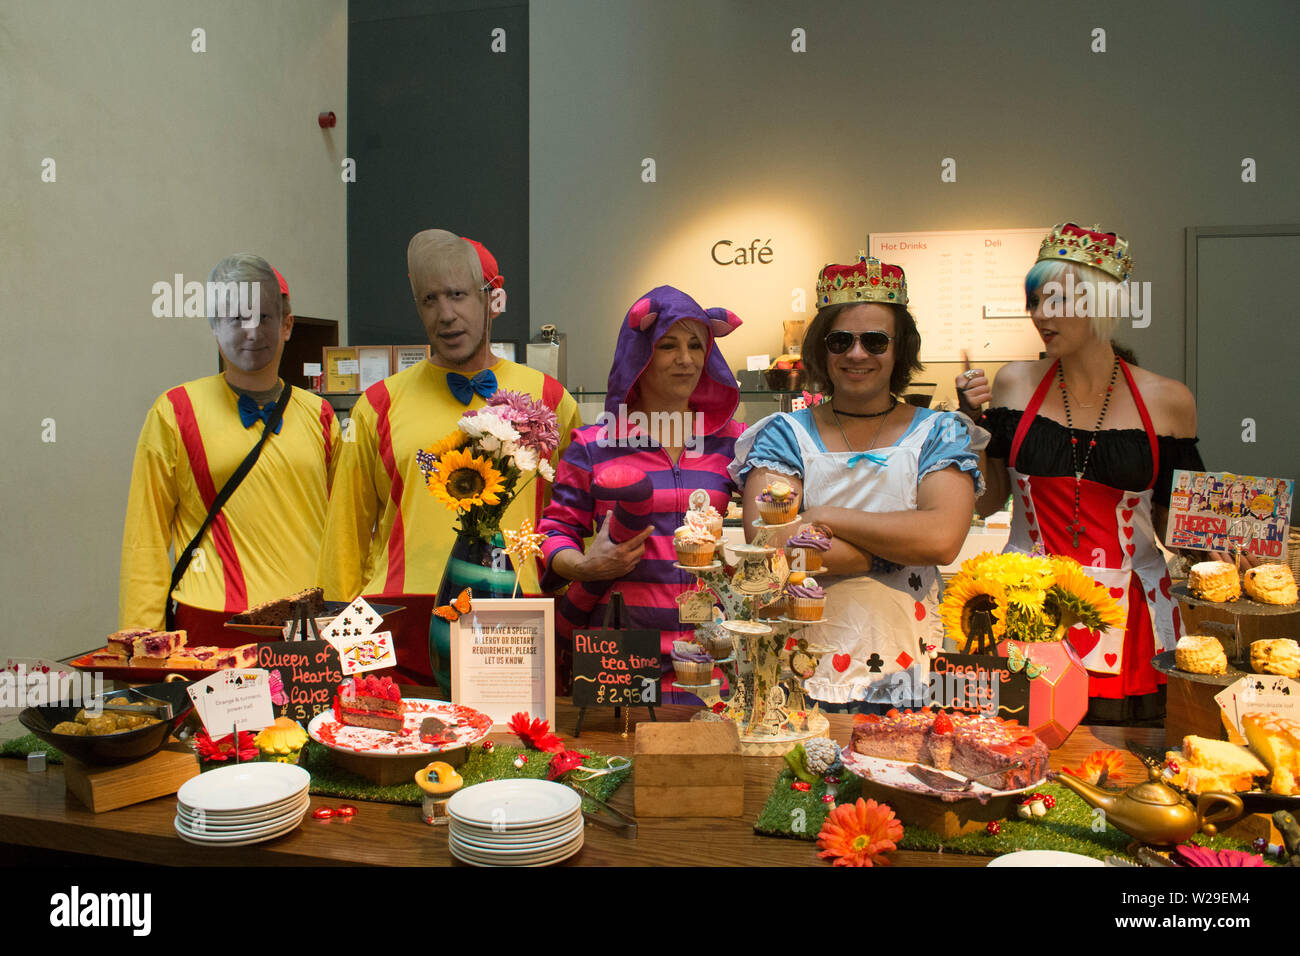 6 July 2019 - Oxford, UK - Inside the cafe at Weston Library with Mad Hatters Tea Party including Madeleina Kay and Joel Baccas. Stock Photo